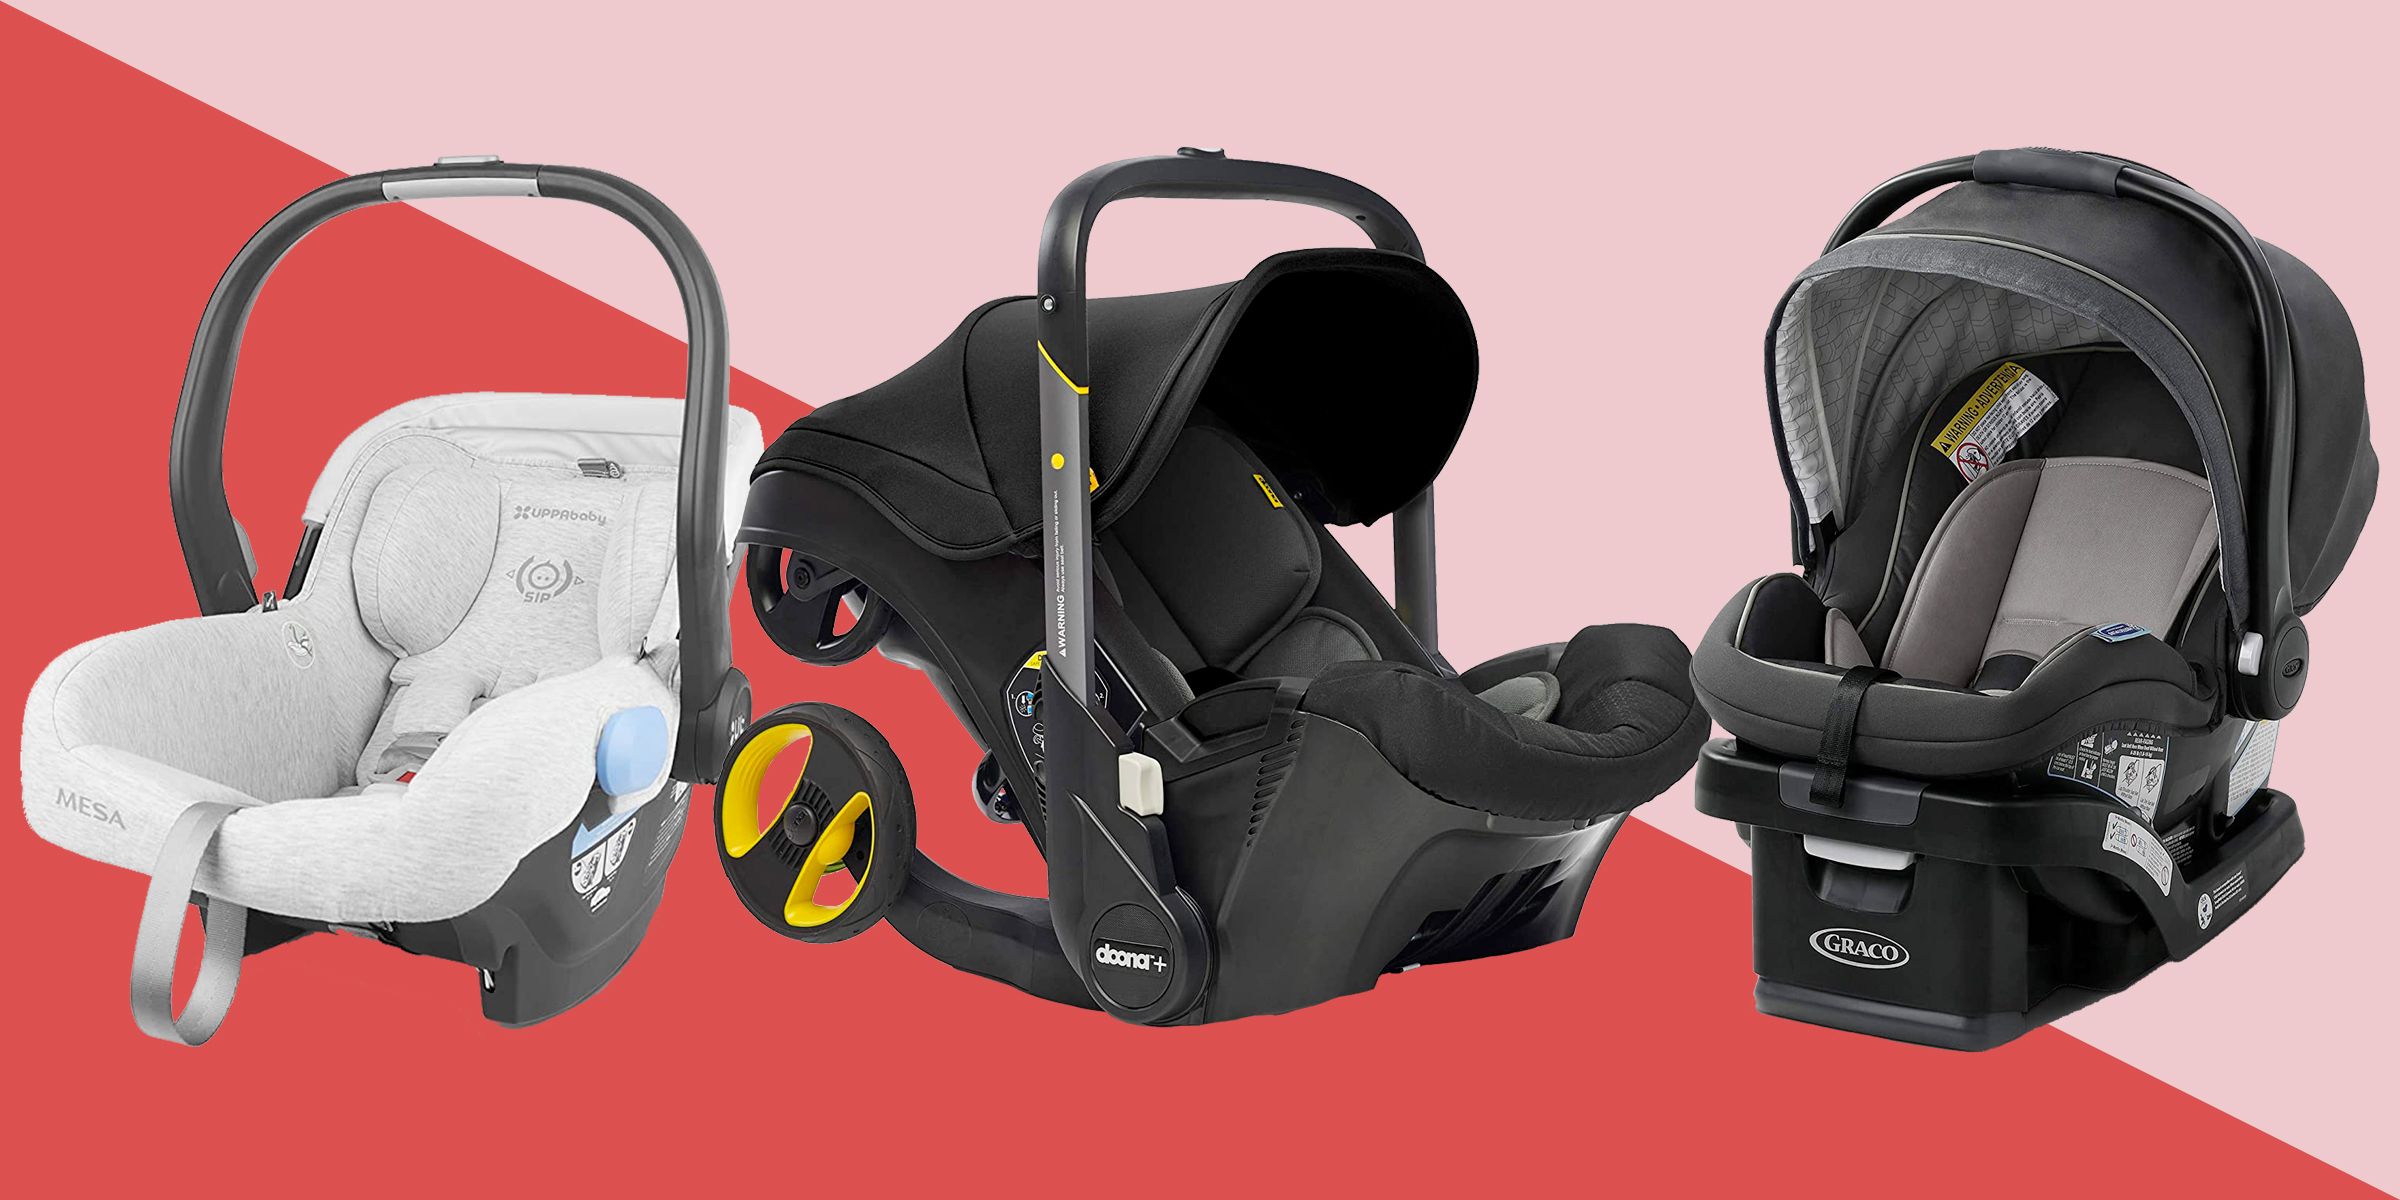 Tested: The Best Infant Car Seats of 2022, as Chosen by Experts